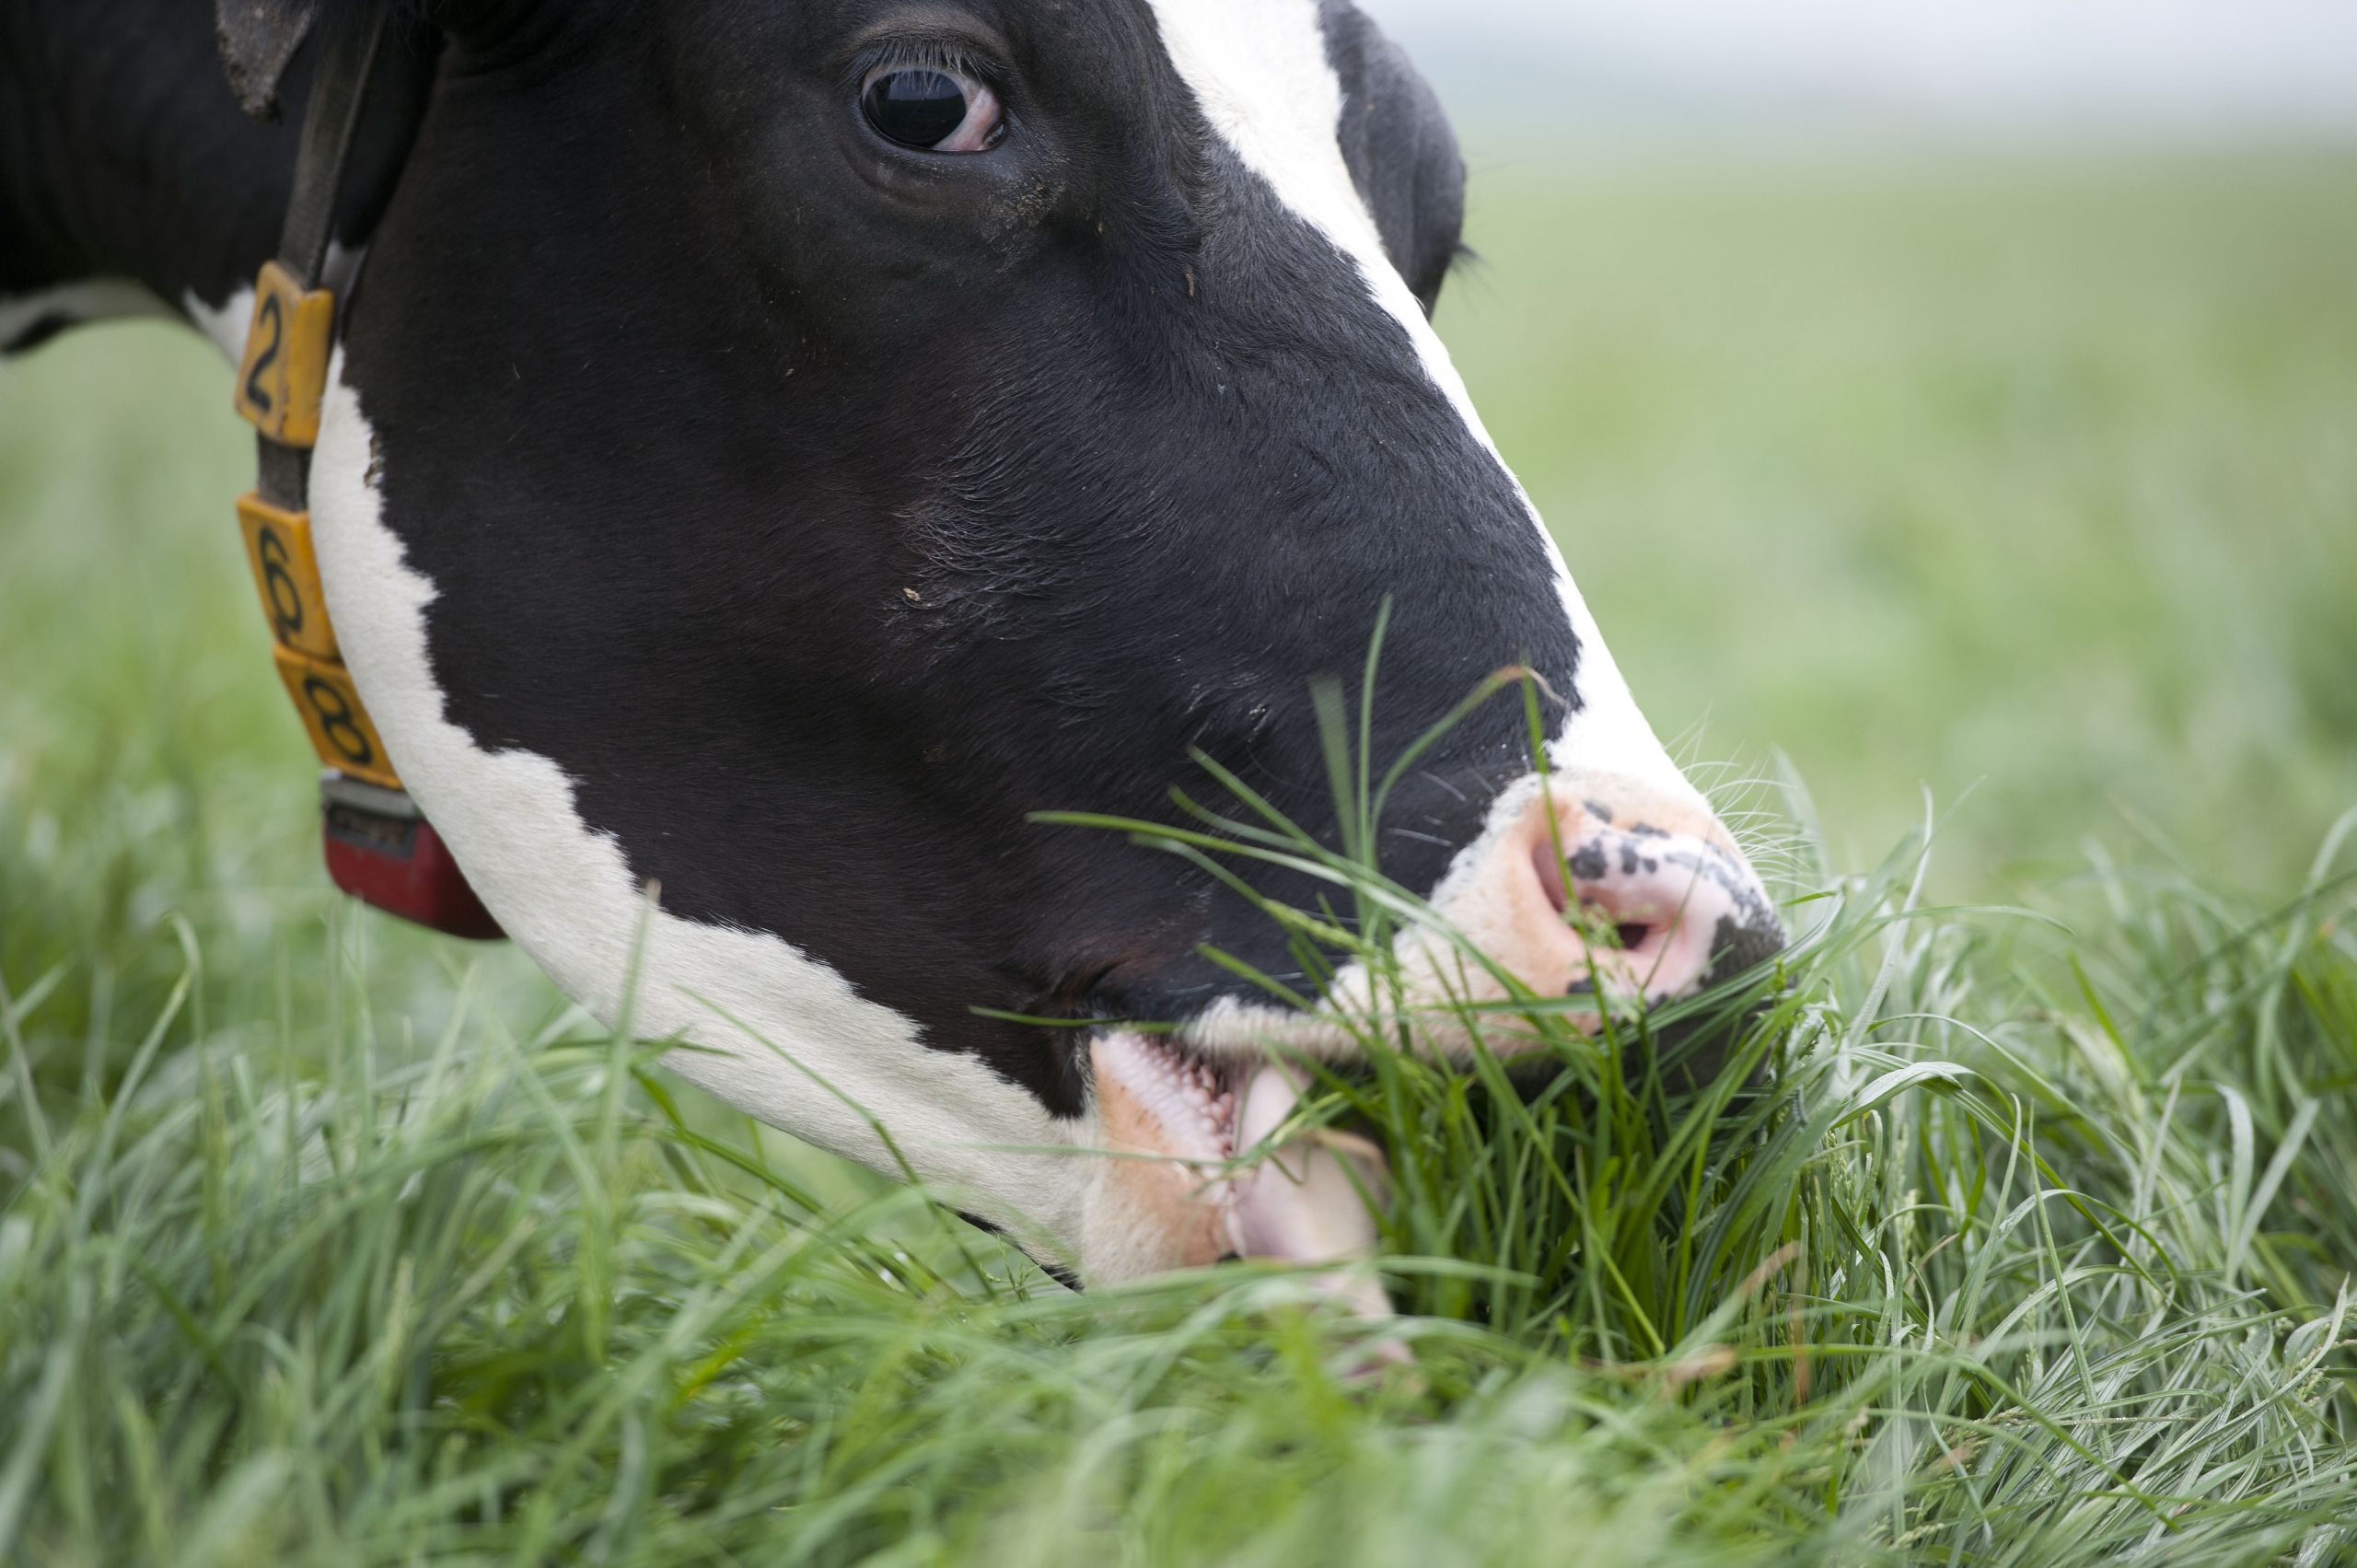 Grazing cropland benefits soil and cow. Photo: Peter Pasveer